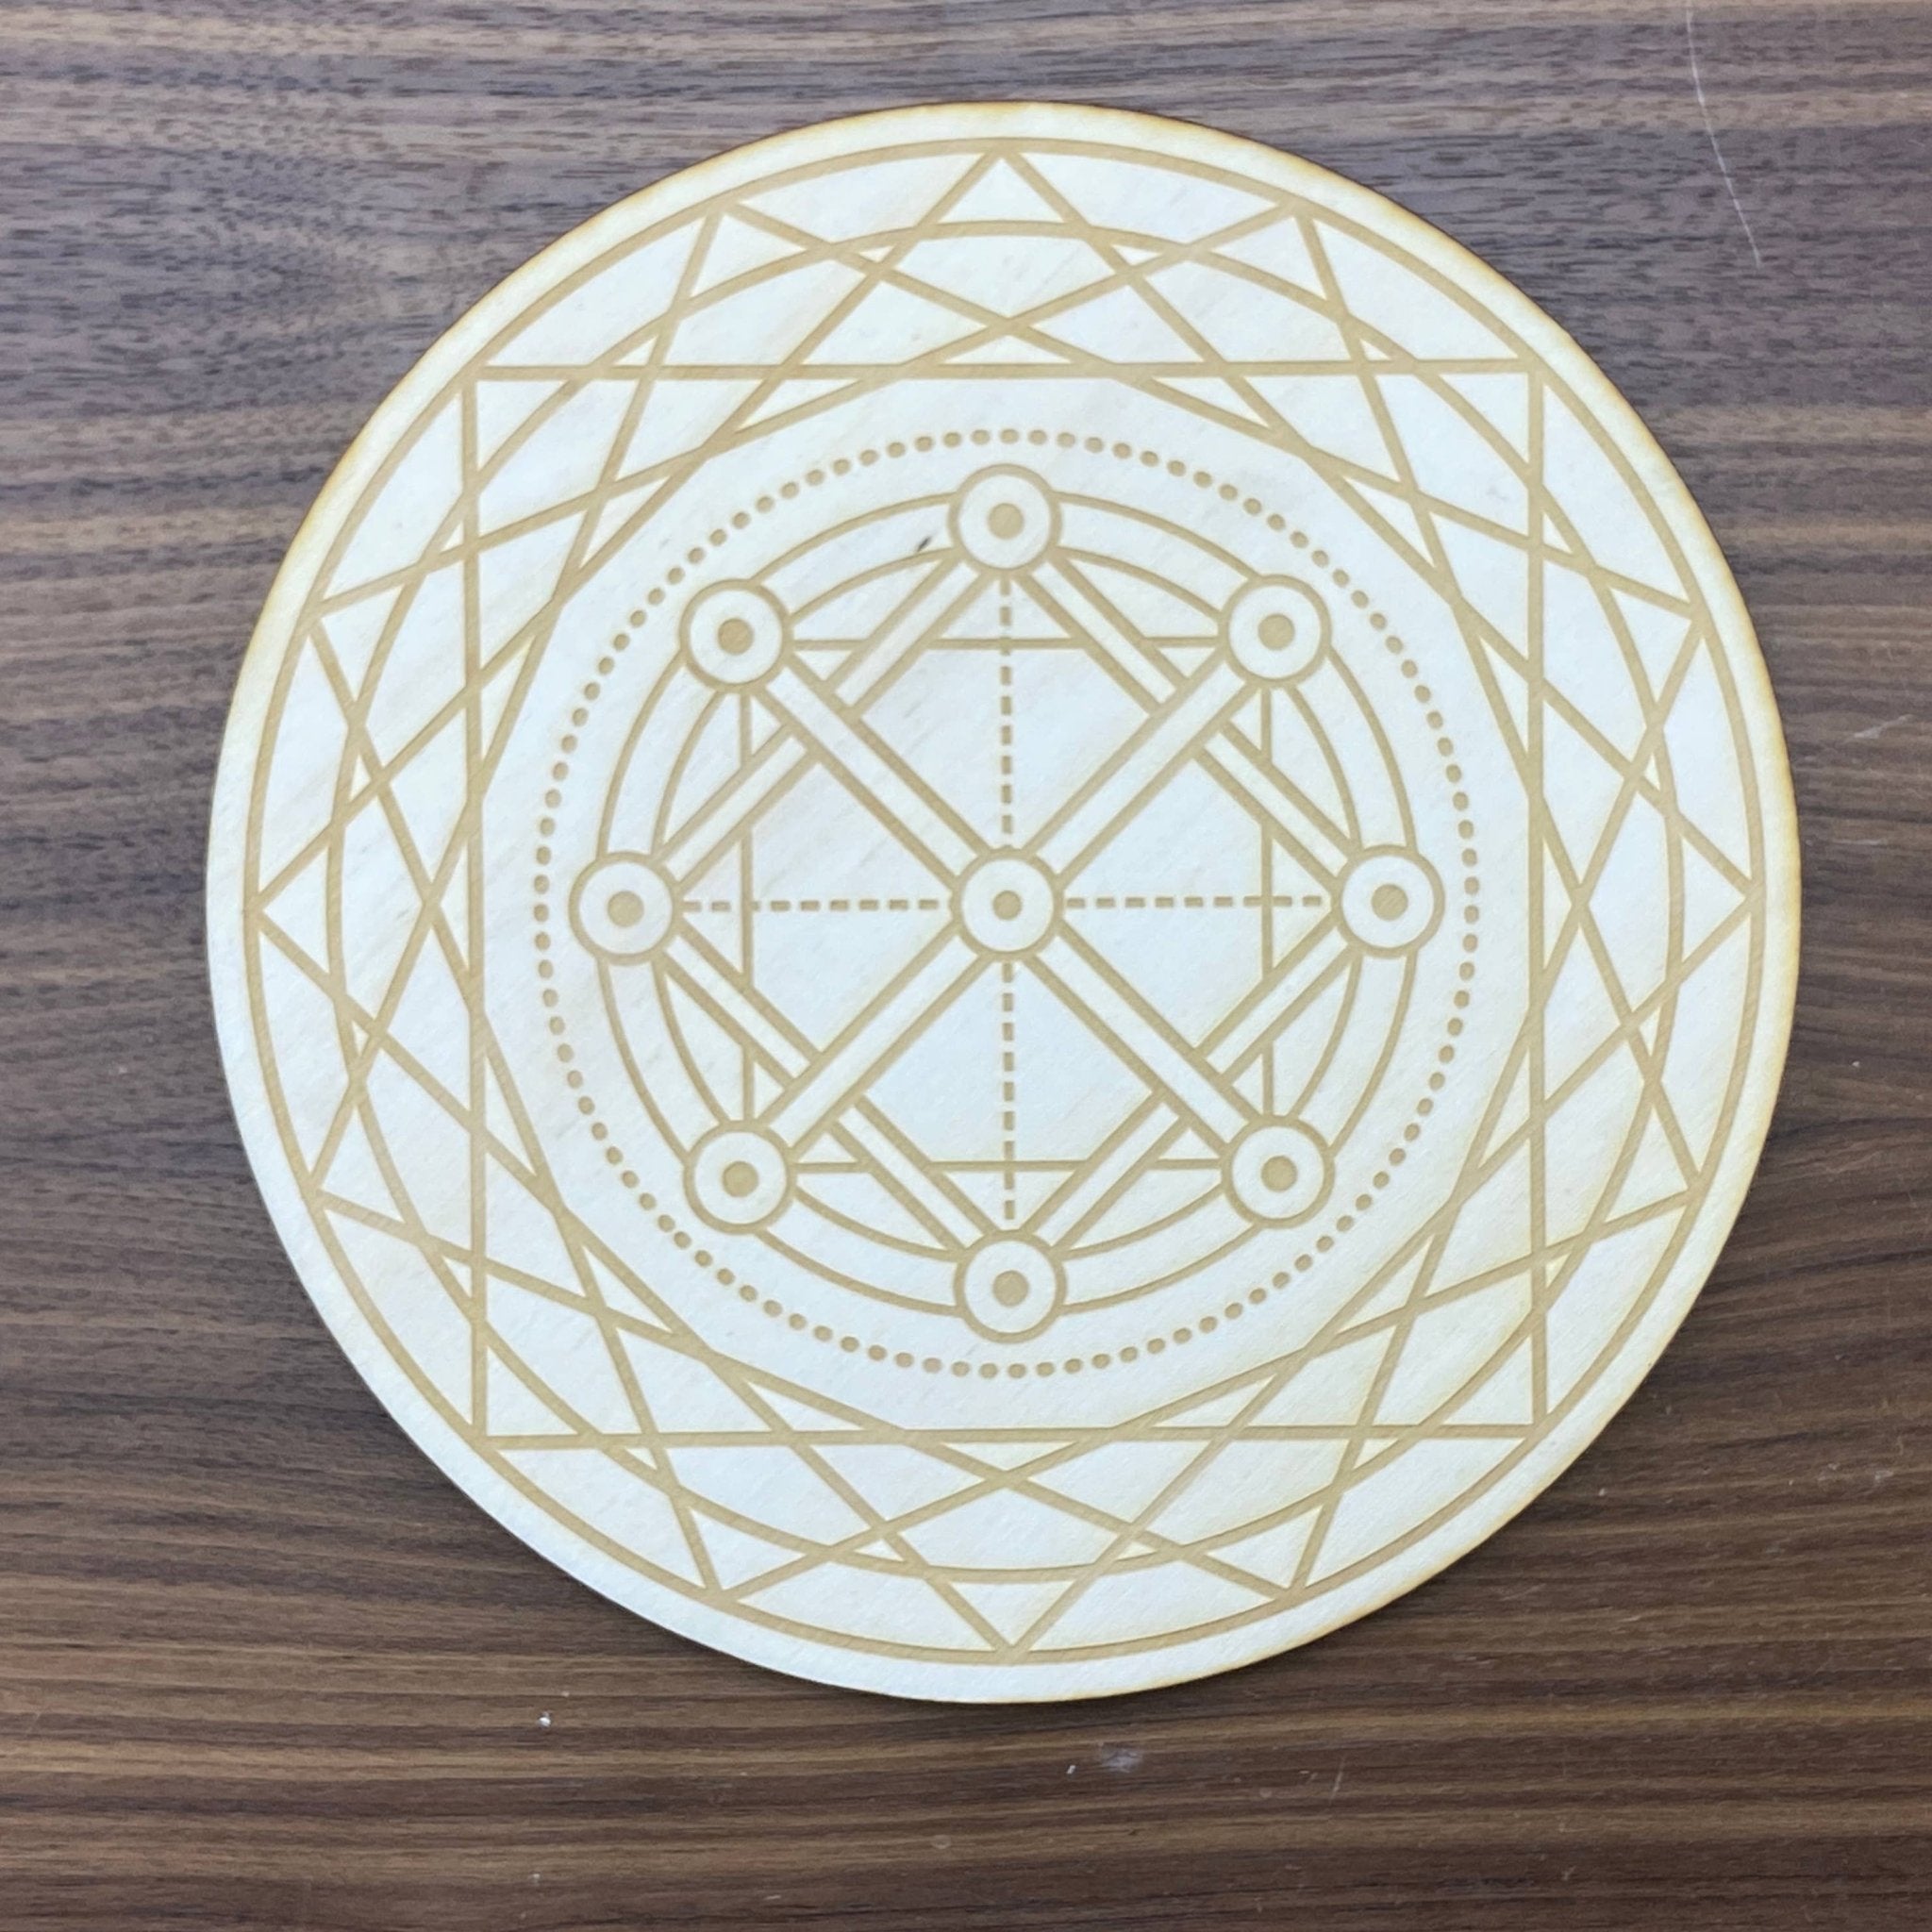 Double Square Crystal Grid | 4 inches - Spiral Circle